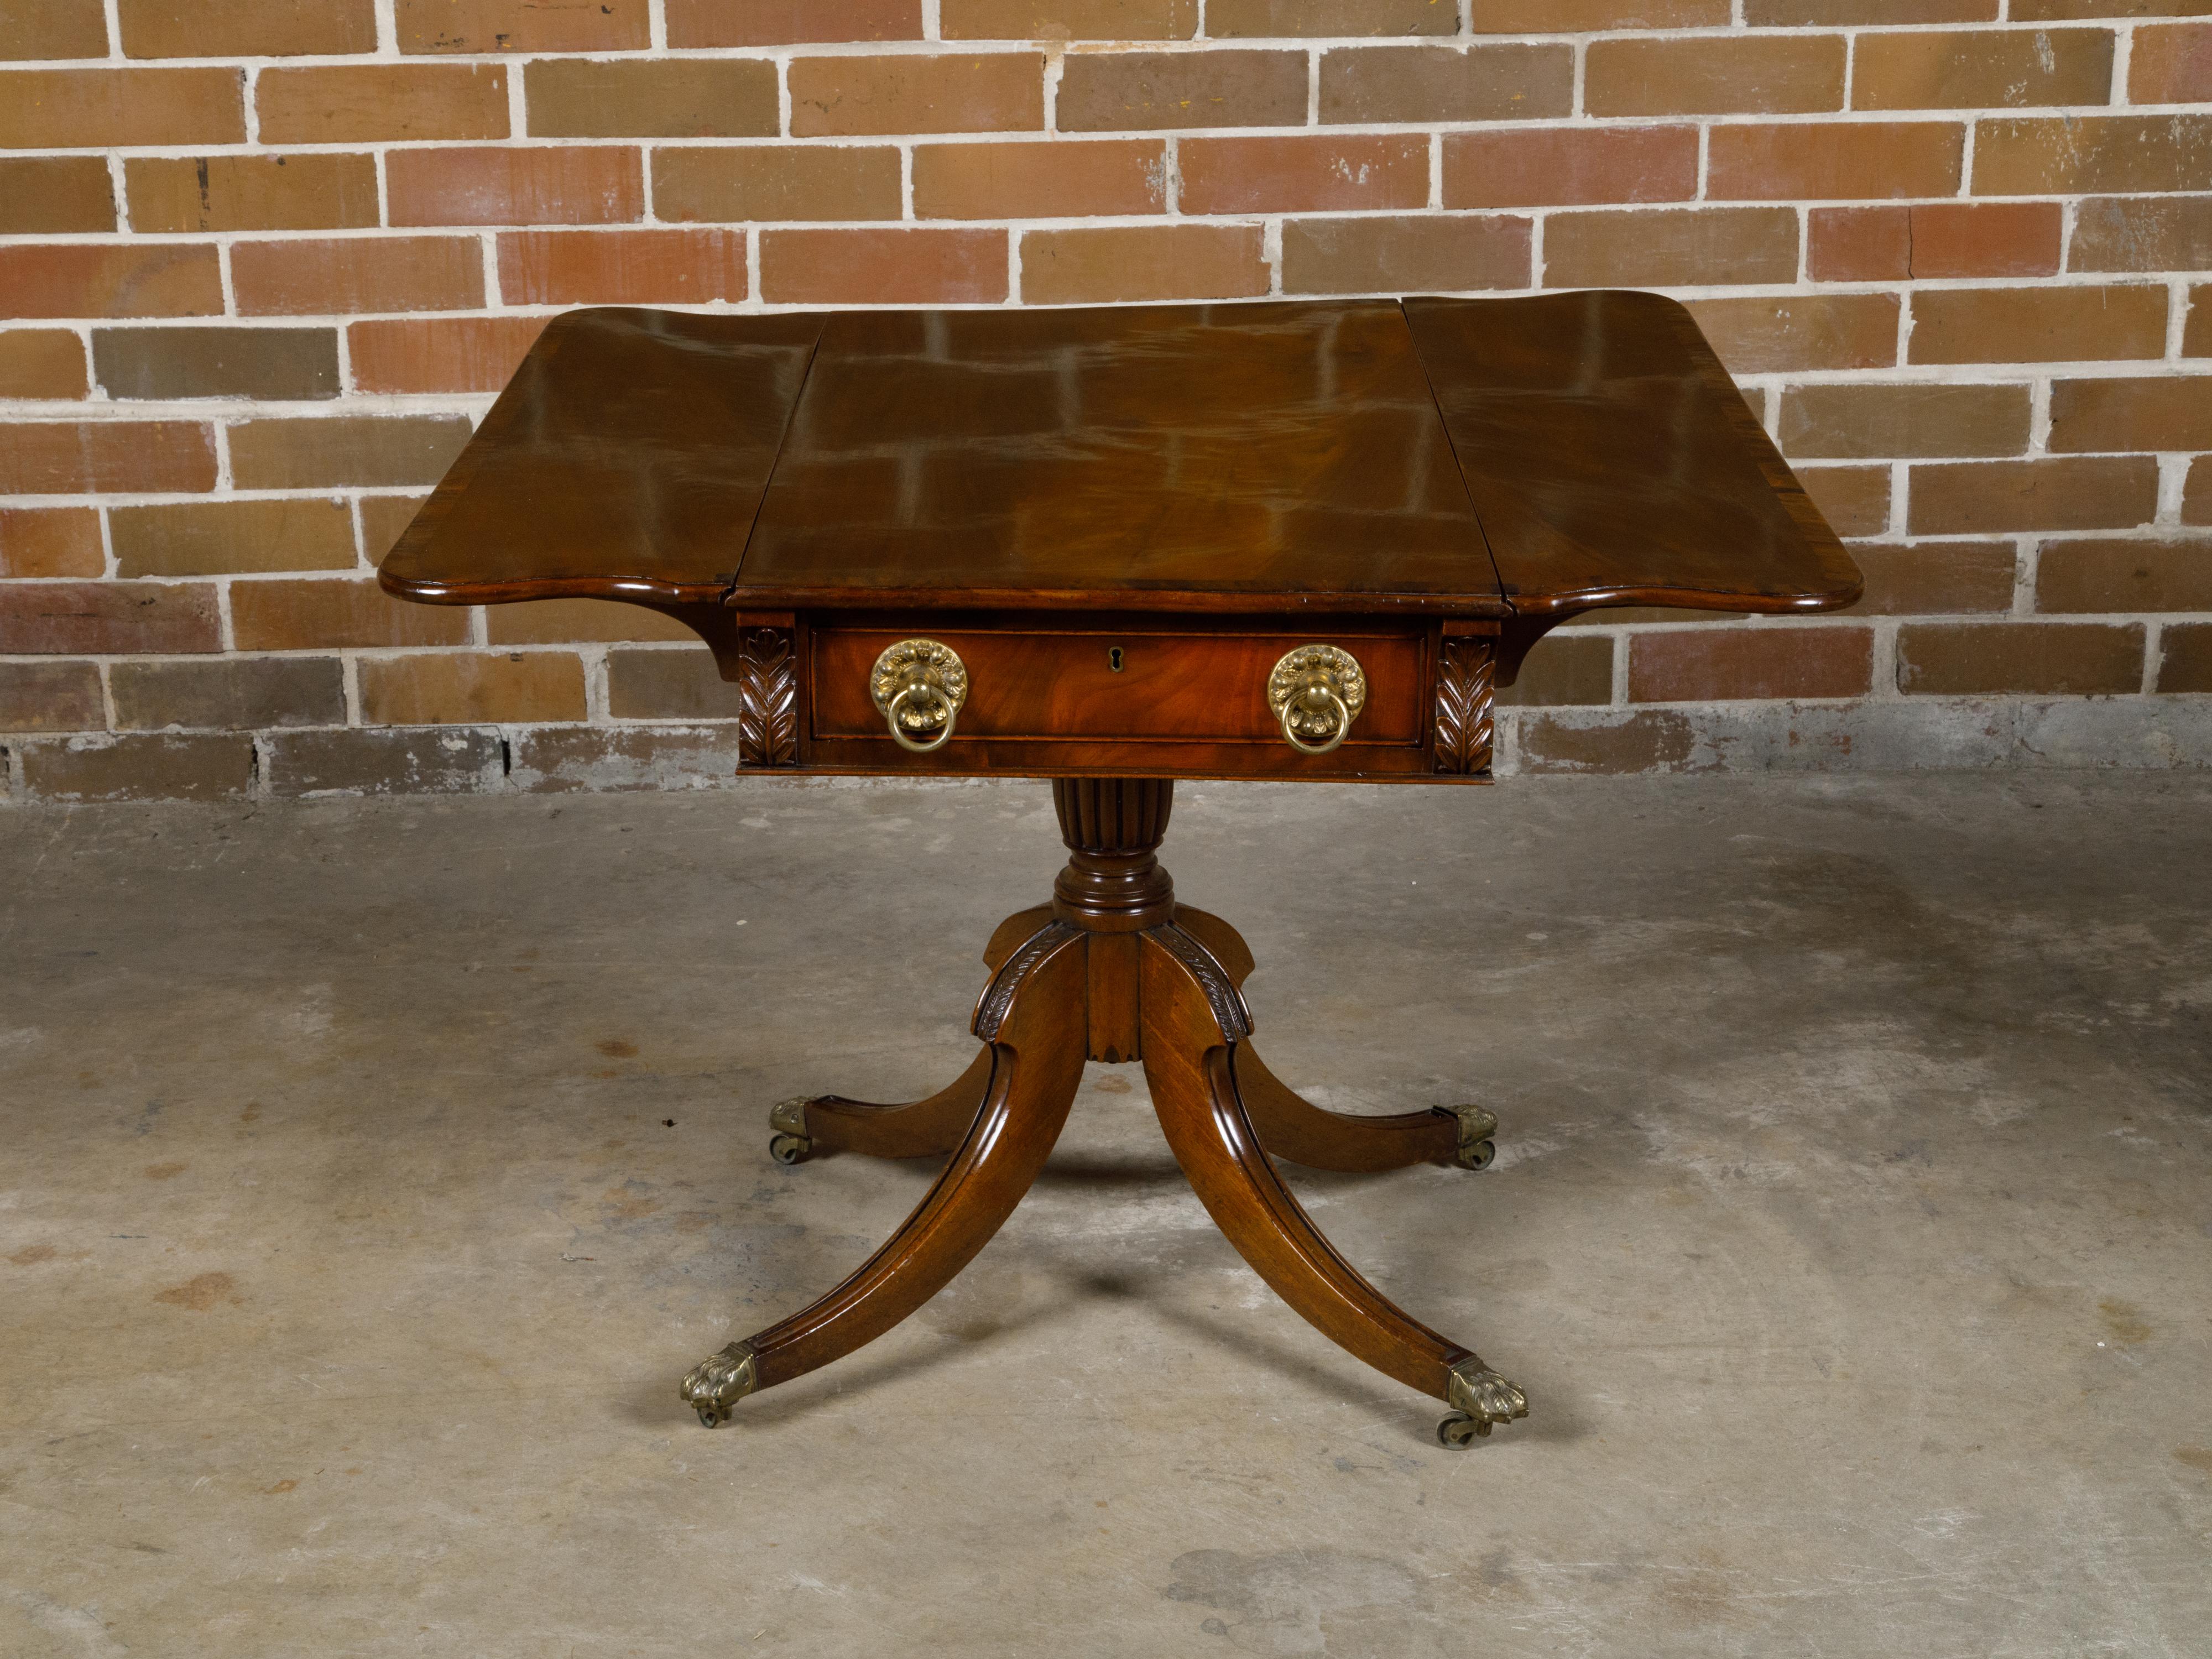 An English Regency period mahogany Pembroke table from the 19th century with drop leaves, cross-banding, single drawer and quadripod base. This exquisite English Regency period mahogany Pembroke table from the 19th century marries functionality with